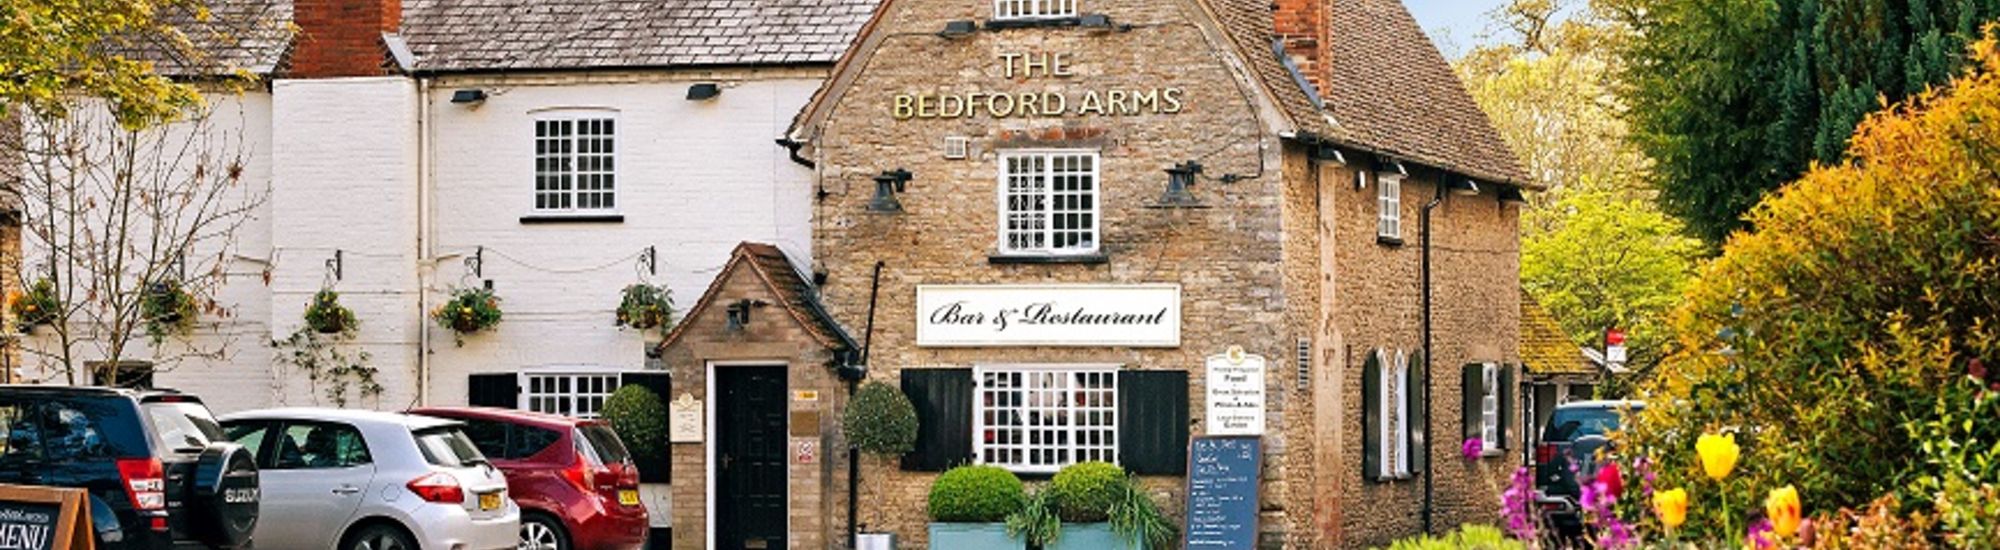 The Bedford Arms, Oakley